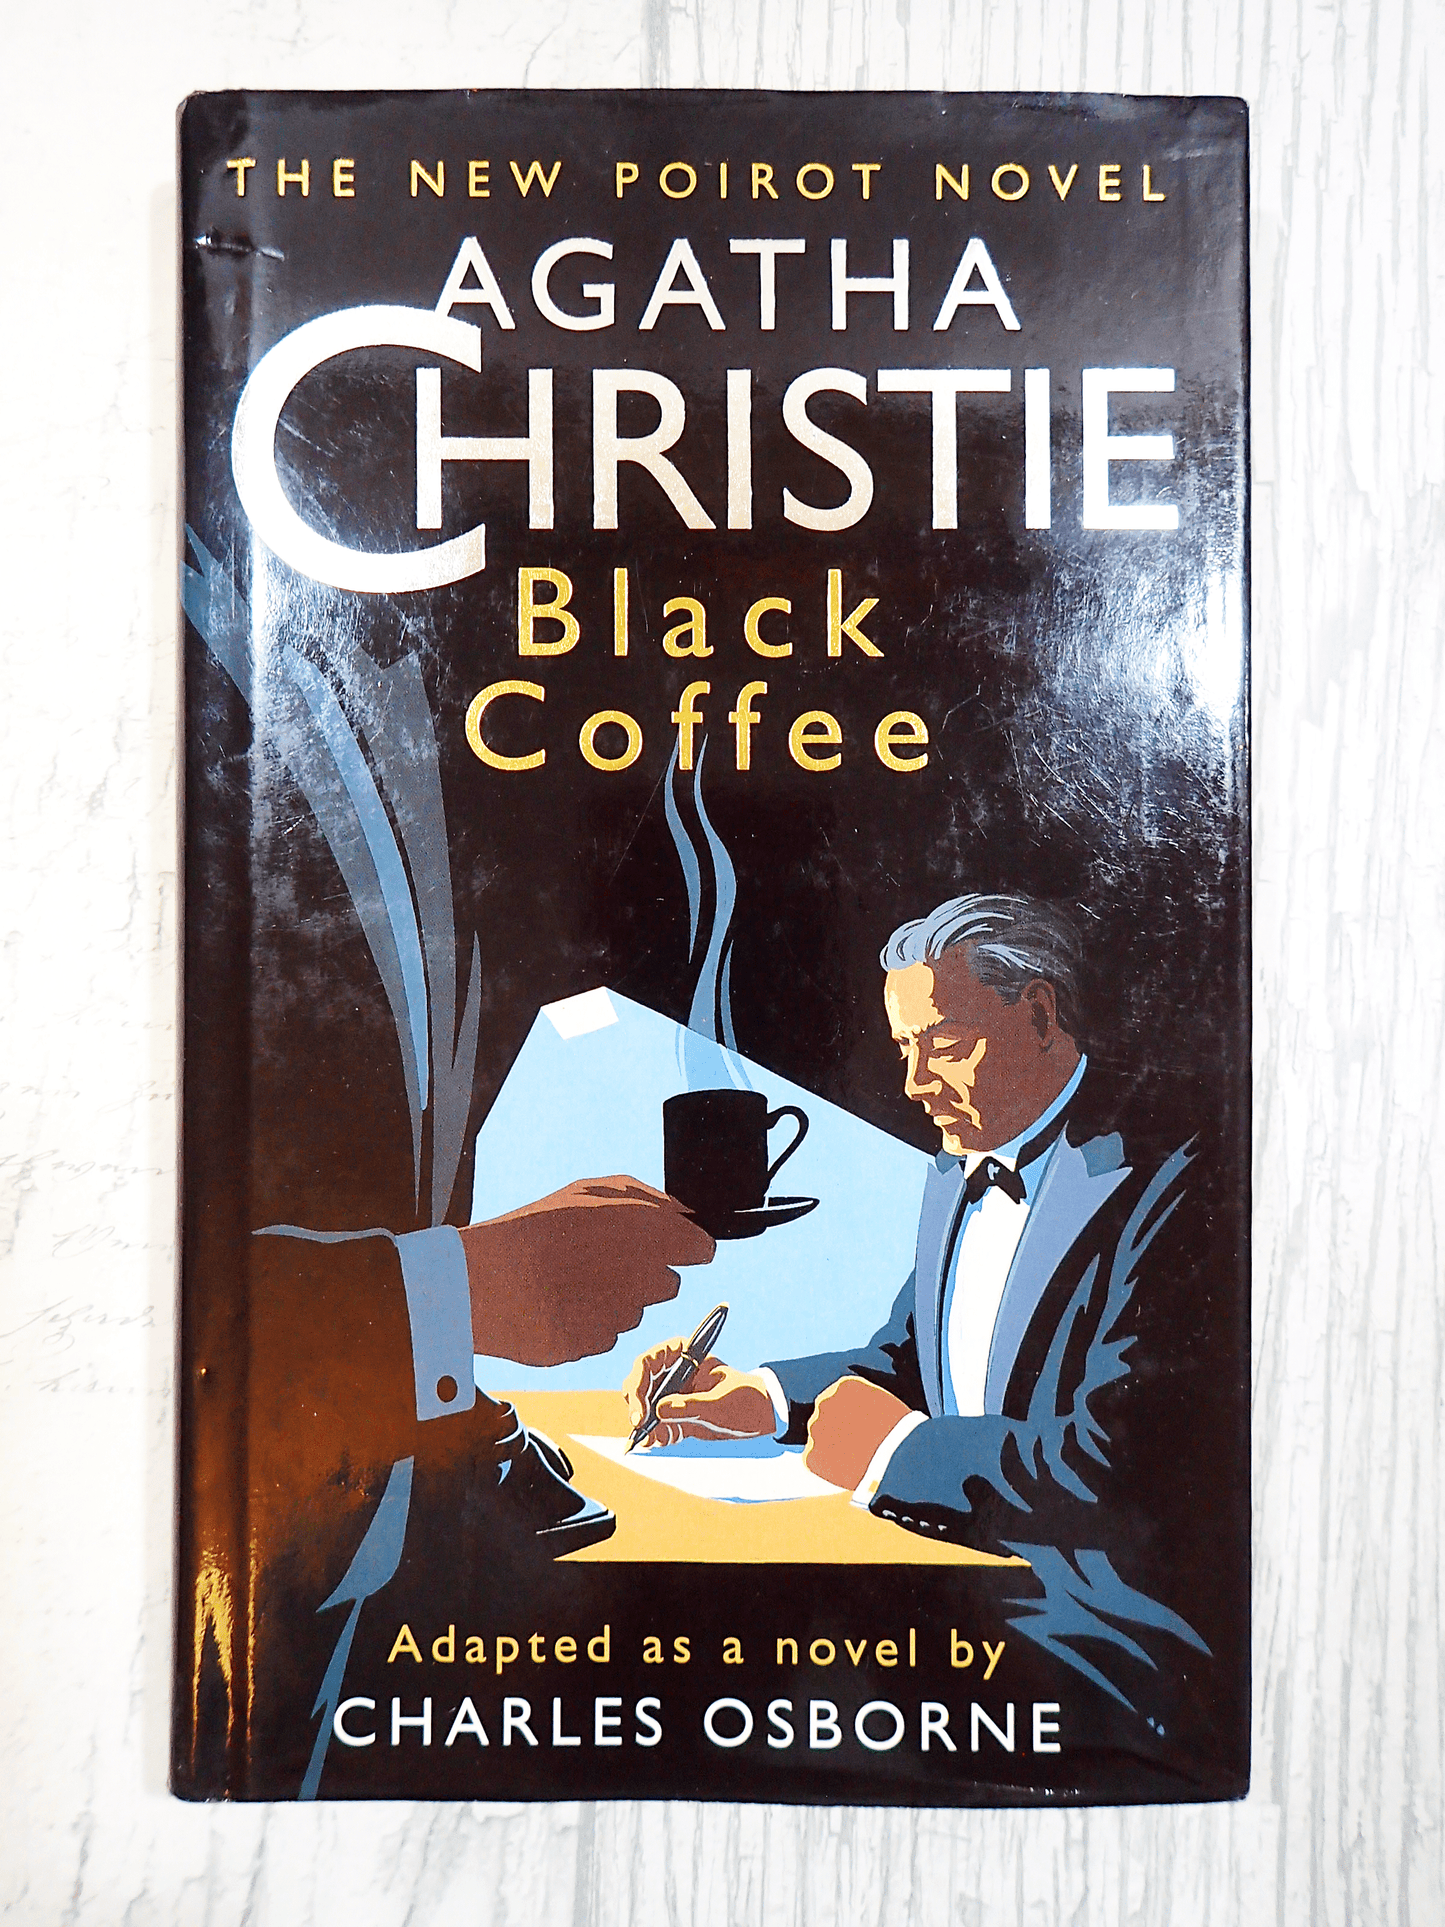 Cover of Agatha Christie Black Coffee Vintage Book Poirot Play Adapted by Charles Osborne with a stylish Art Deco design showing two men in tuxedos and one drinking coffee against a light background. 